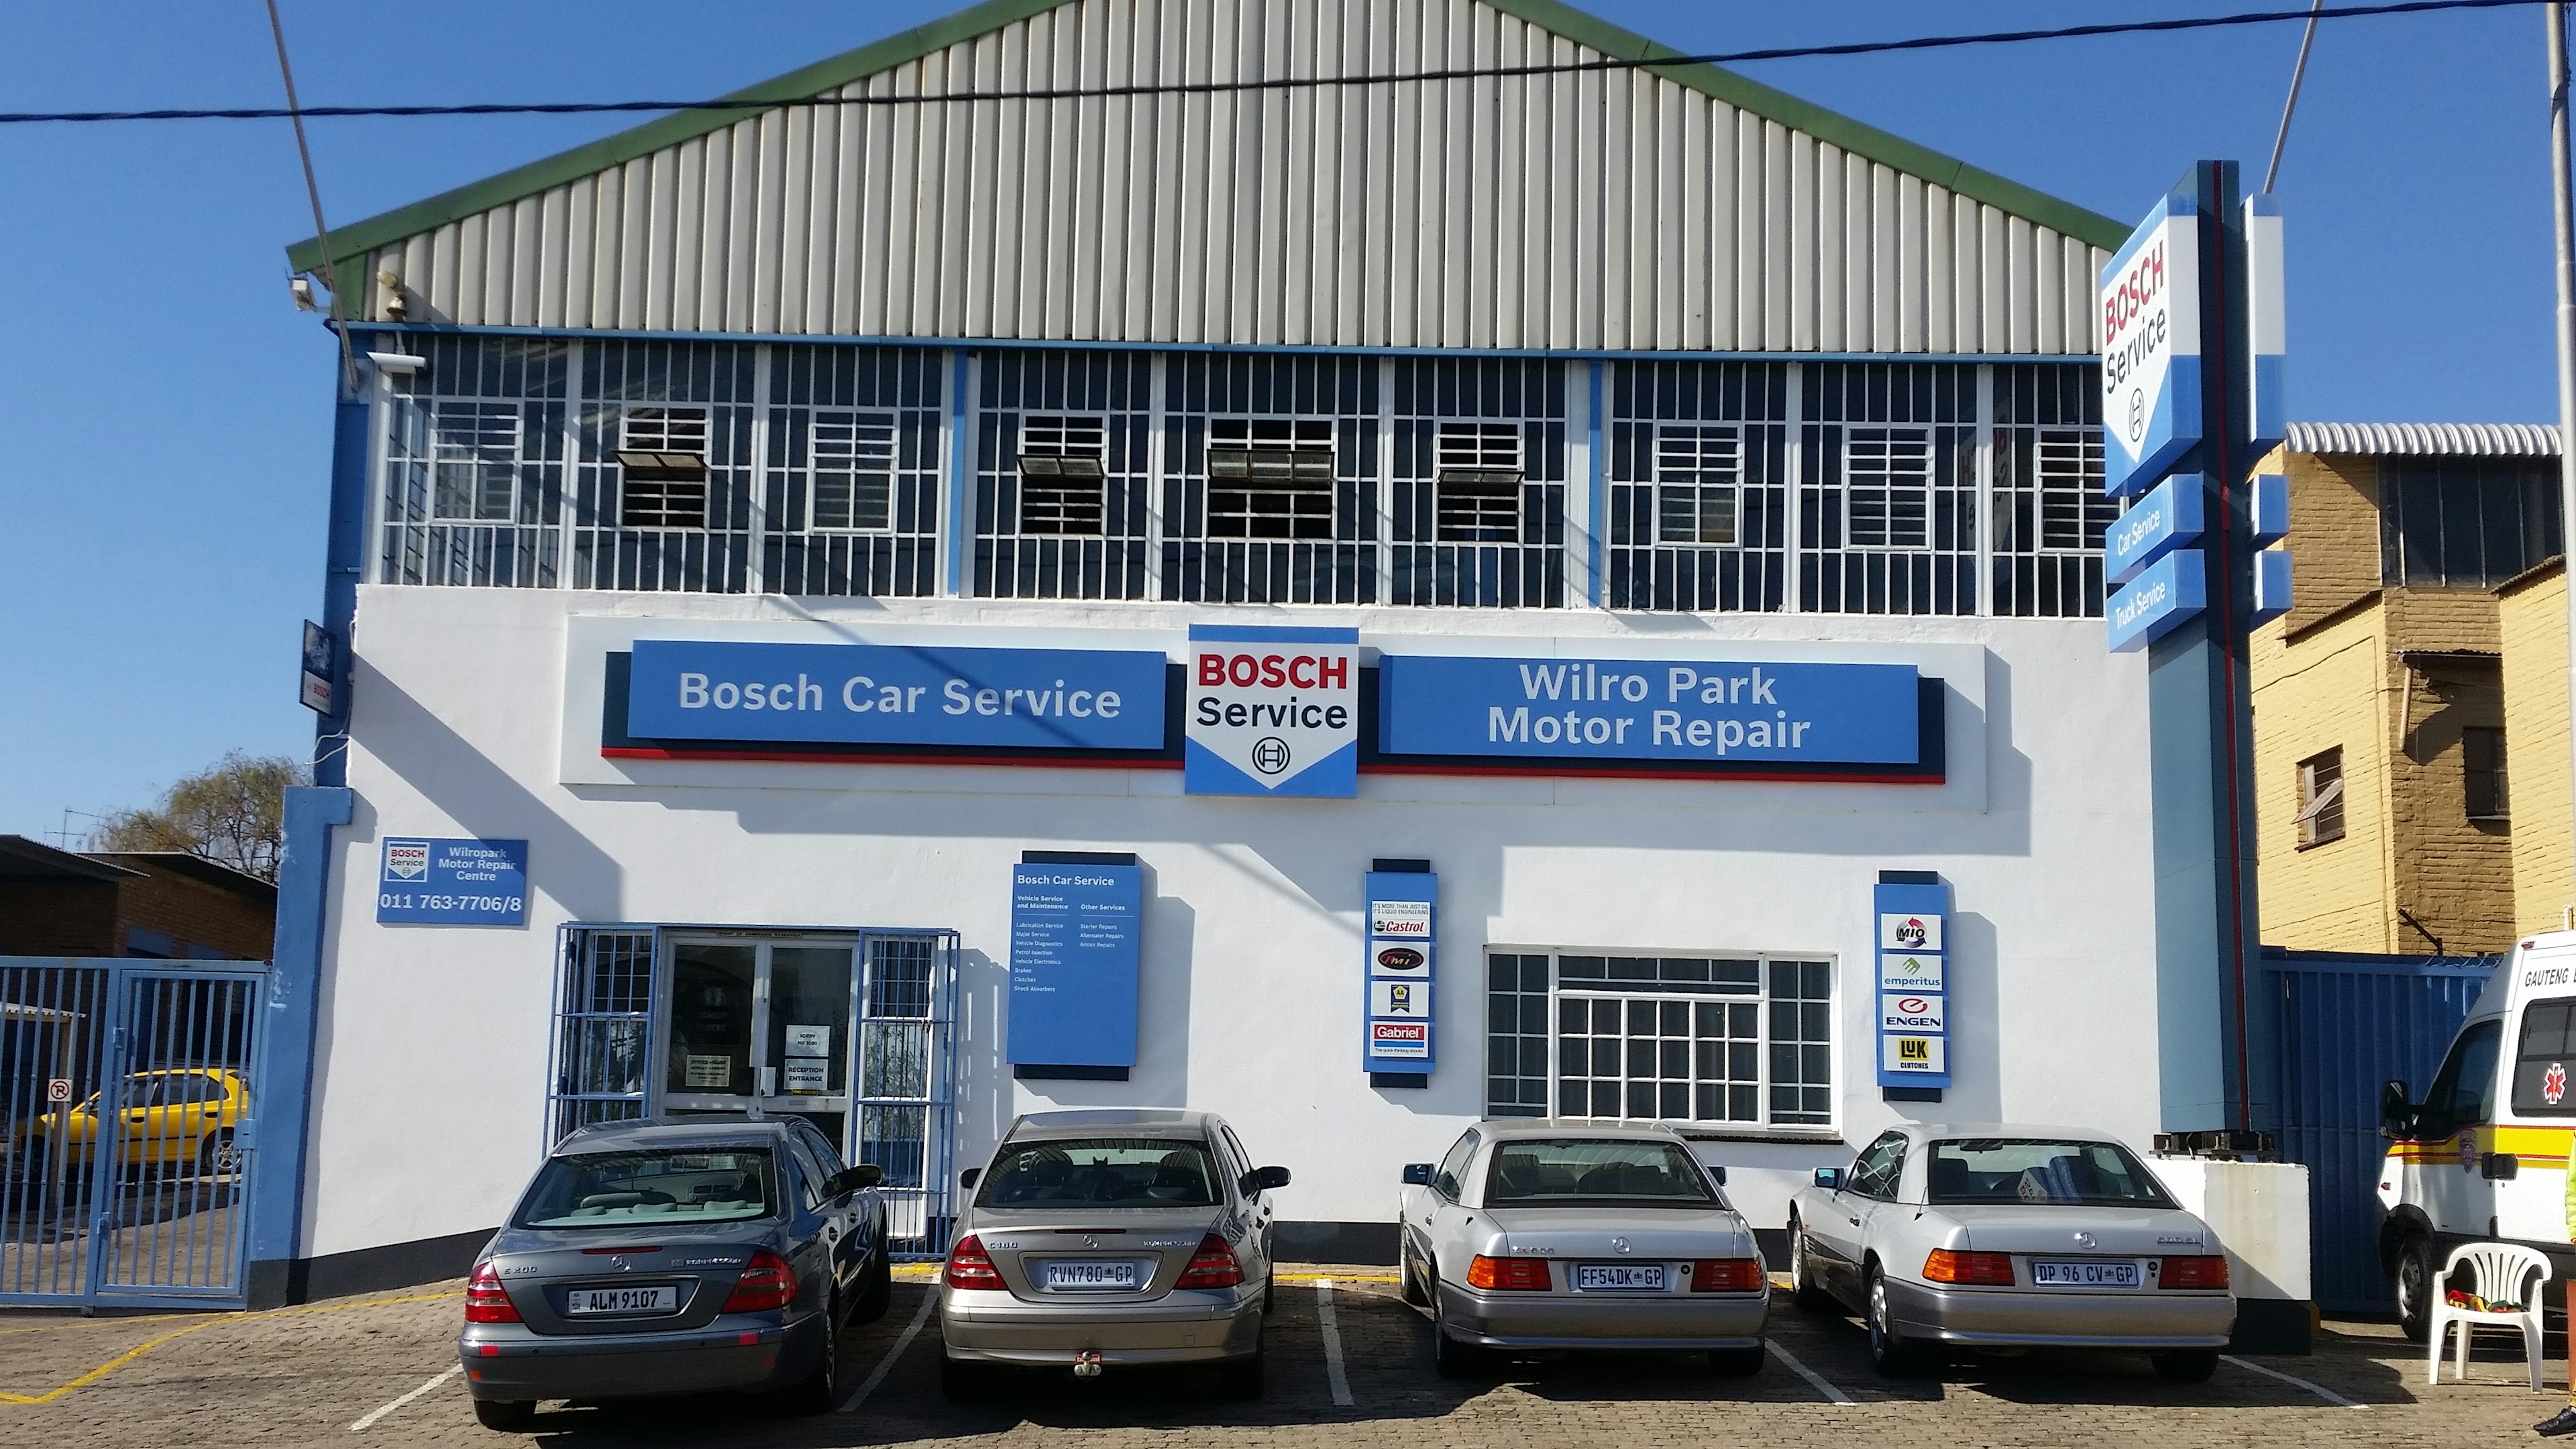 Wilropark Motor Repairs Centre CC (BOSCH)